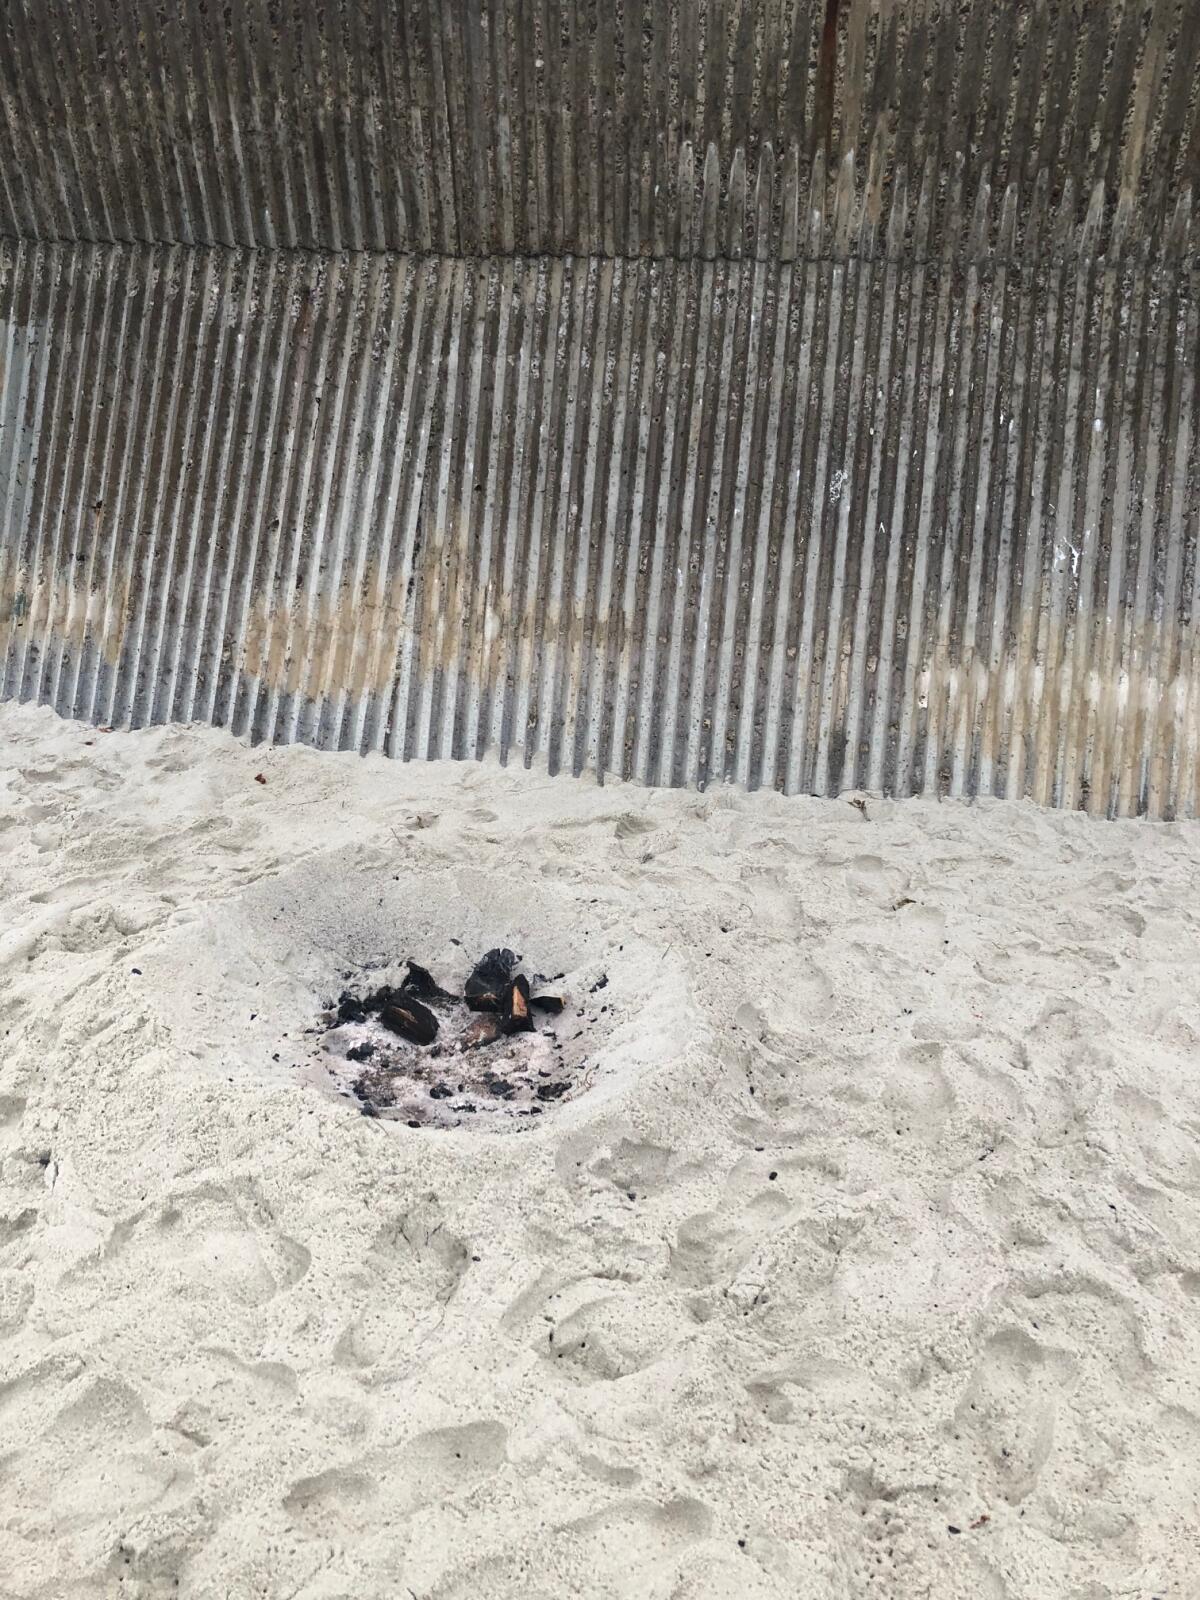 Remnants from a beach fire in the sand at Marine Street Beach.